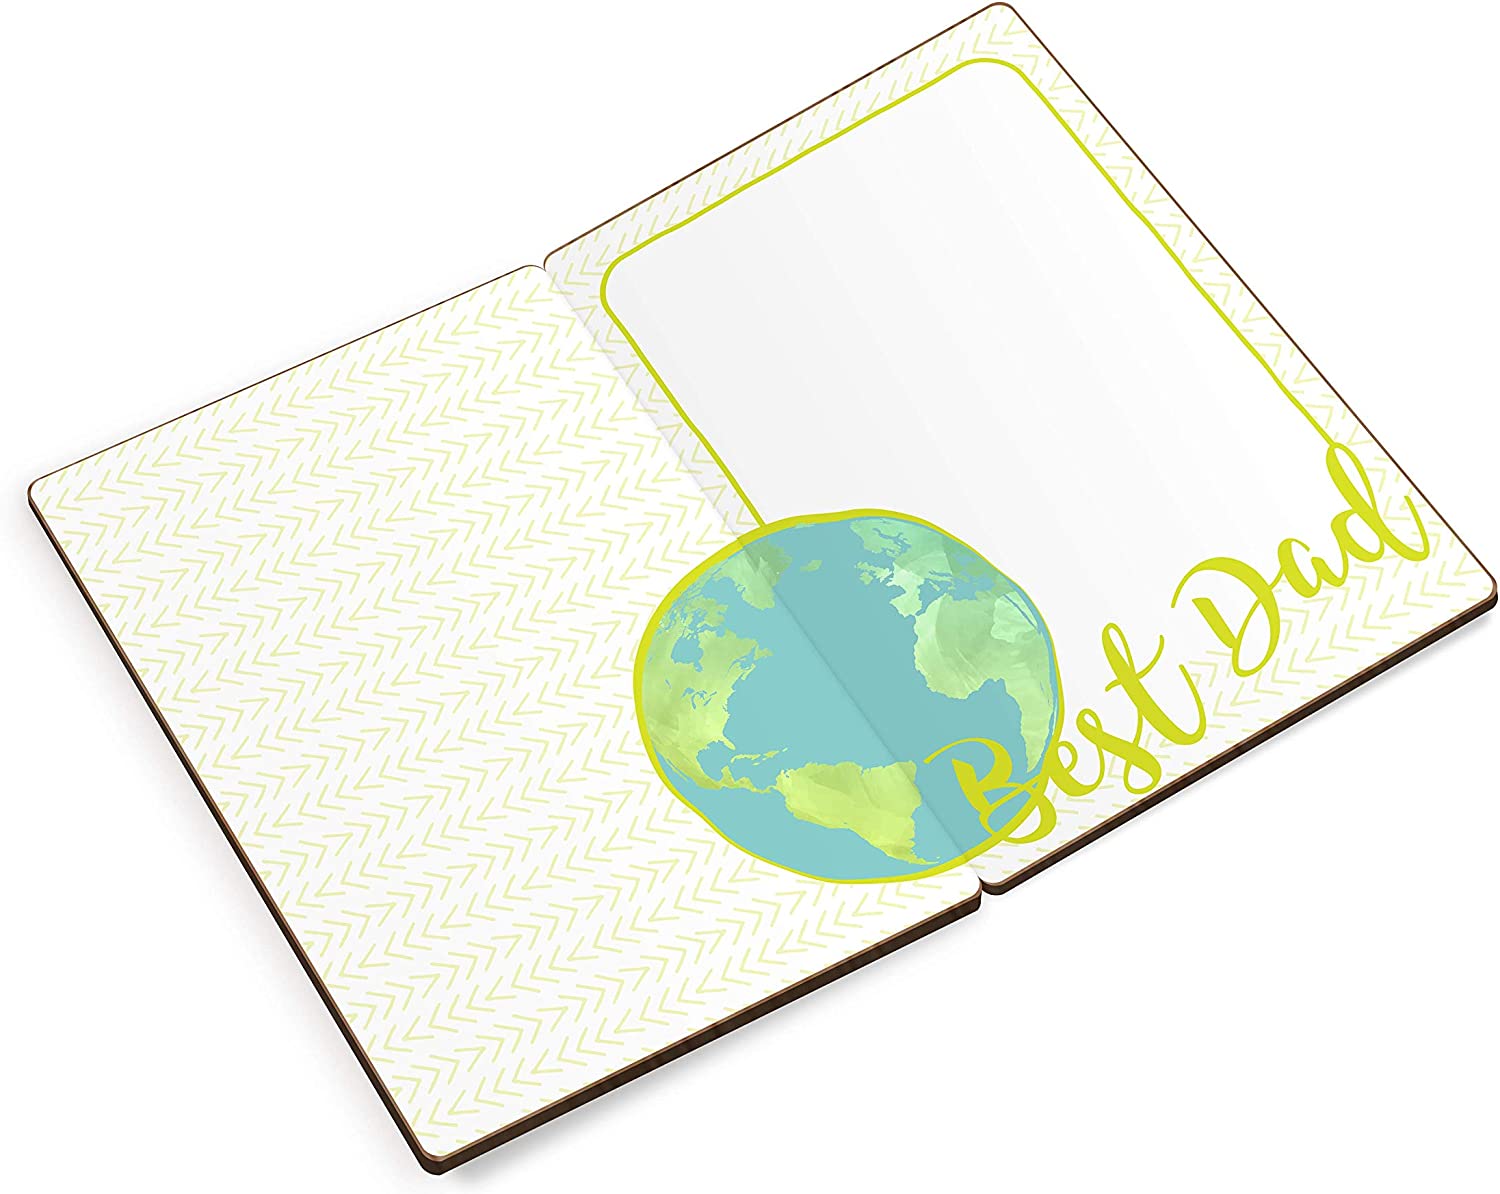 Bamboo Greeting Card | Parent - World's Best Dad